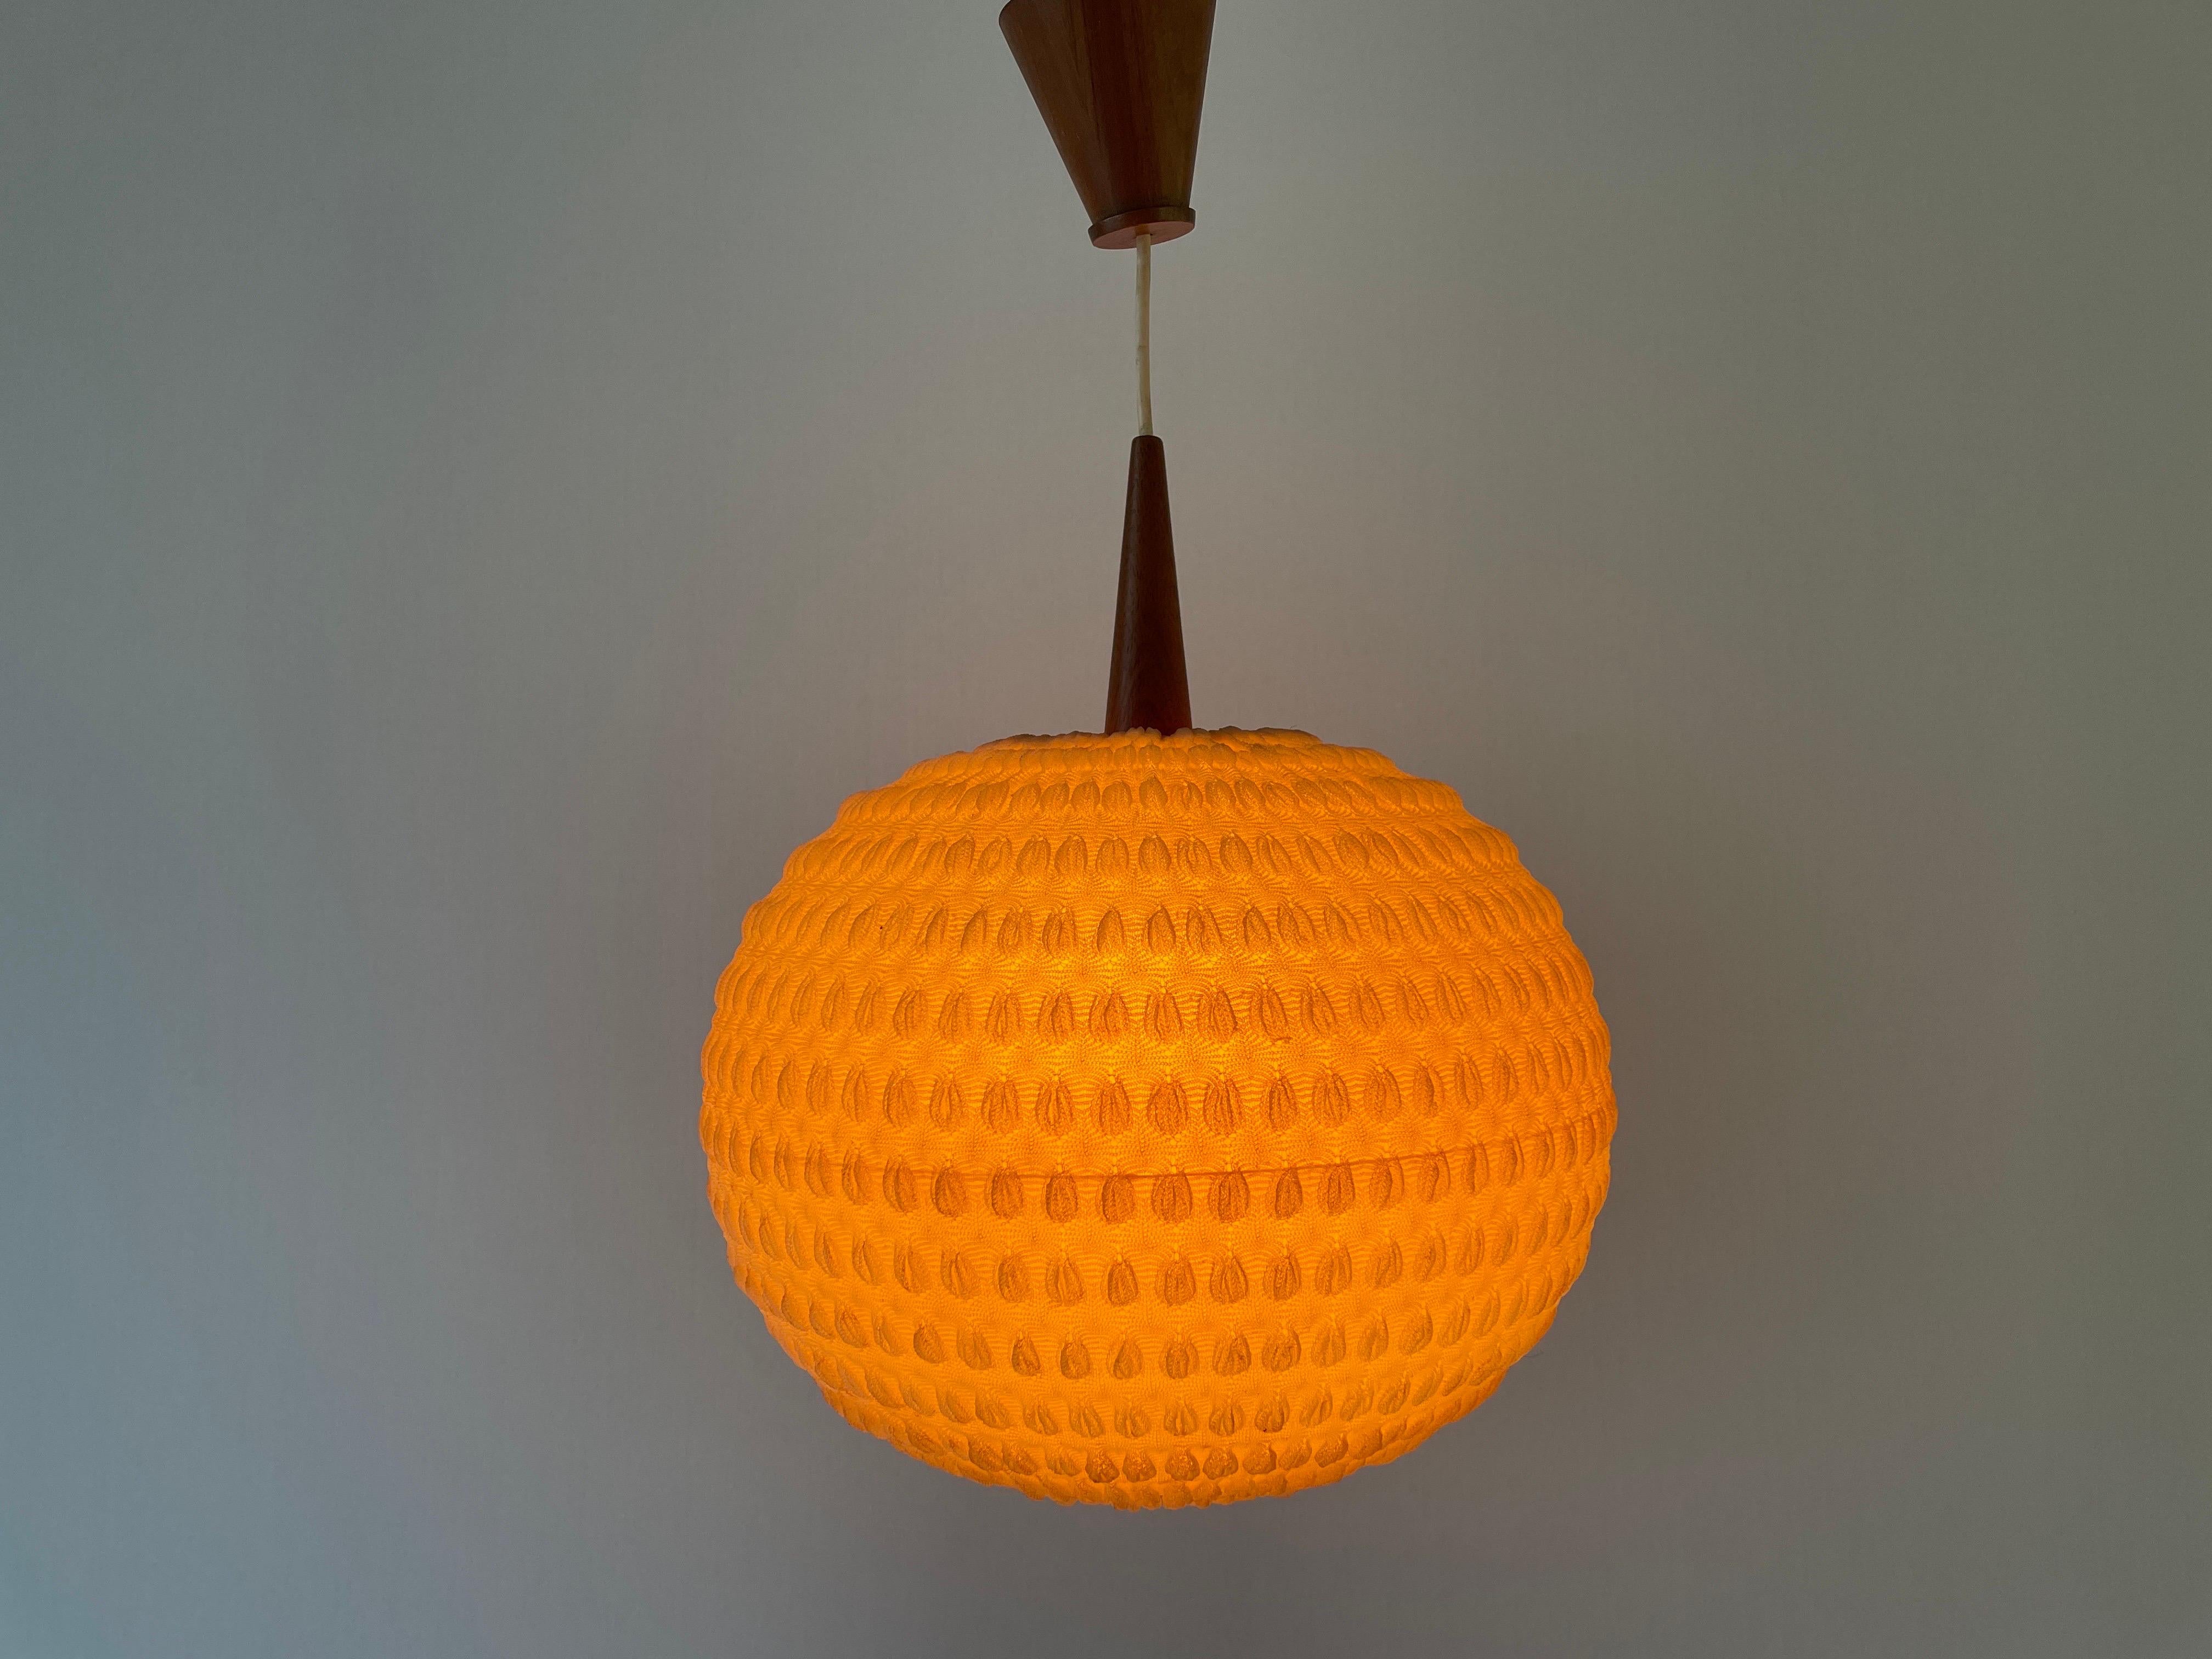 Teak & Ball Fabric Shade Ceiling Lamp by Temde, 1960s, Germany For Sale 10